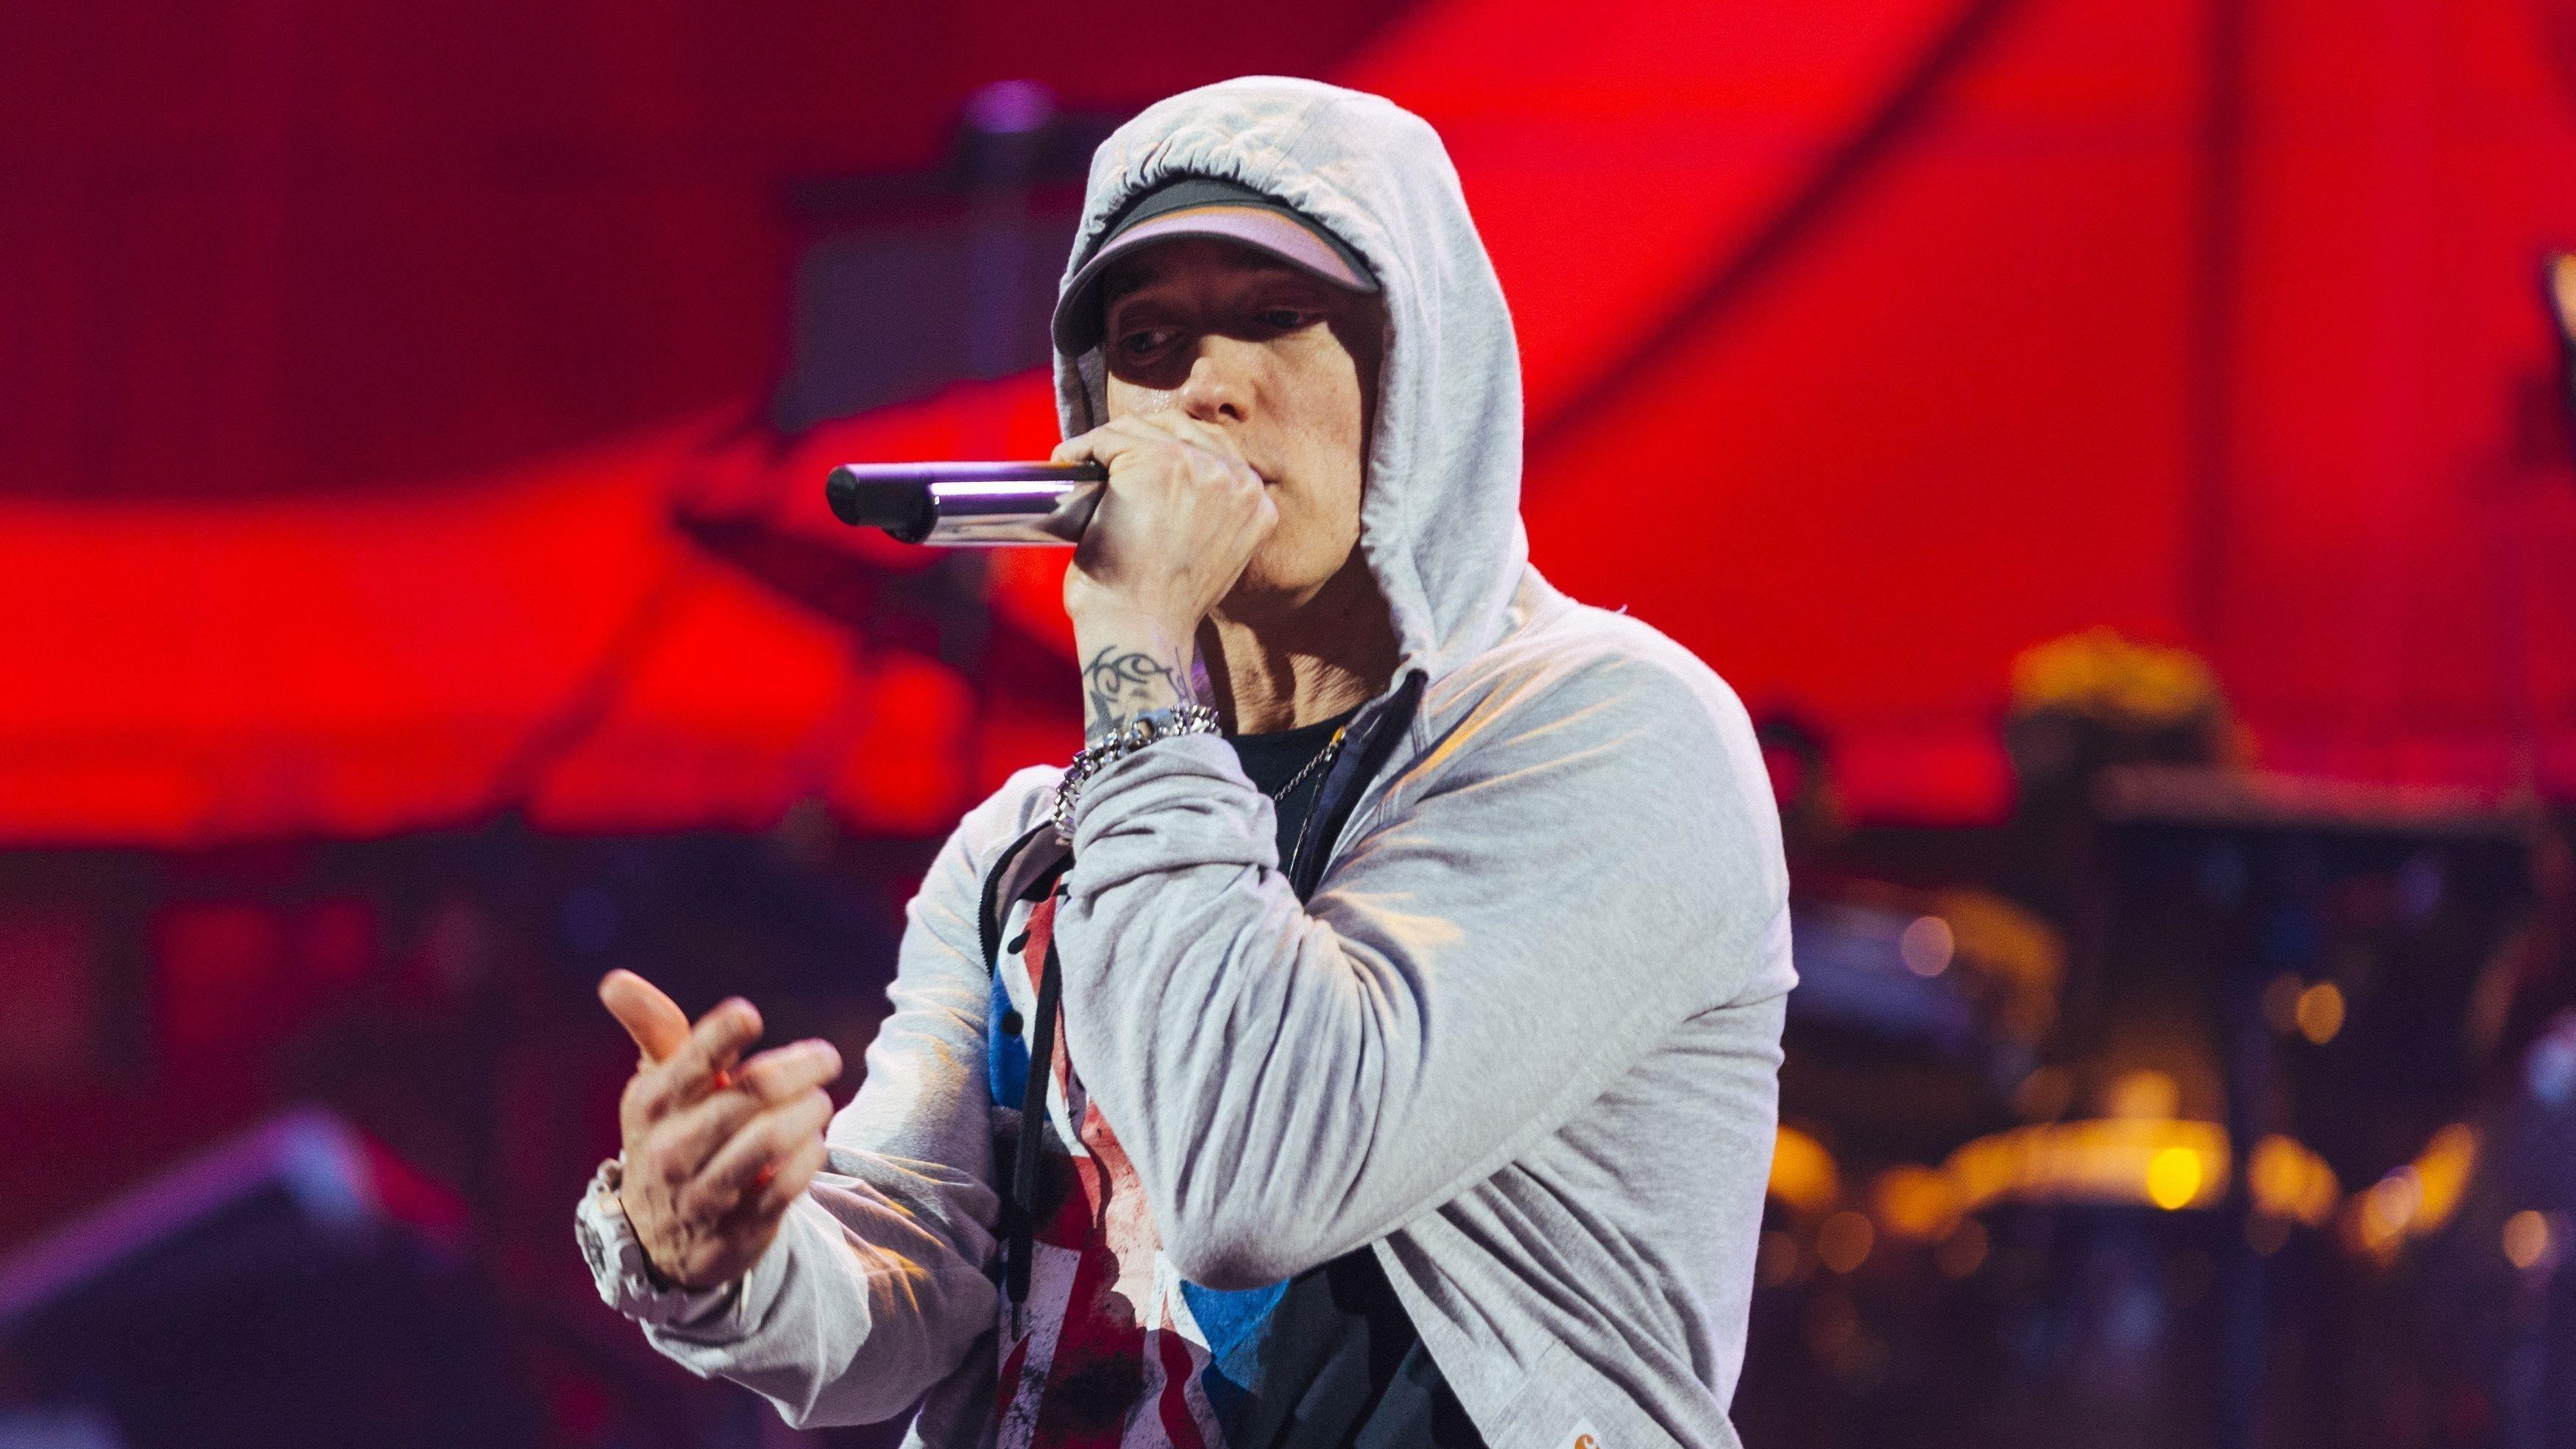 Eminem breaks his own chart record with new album